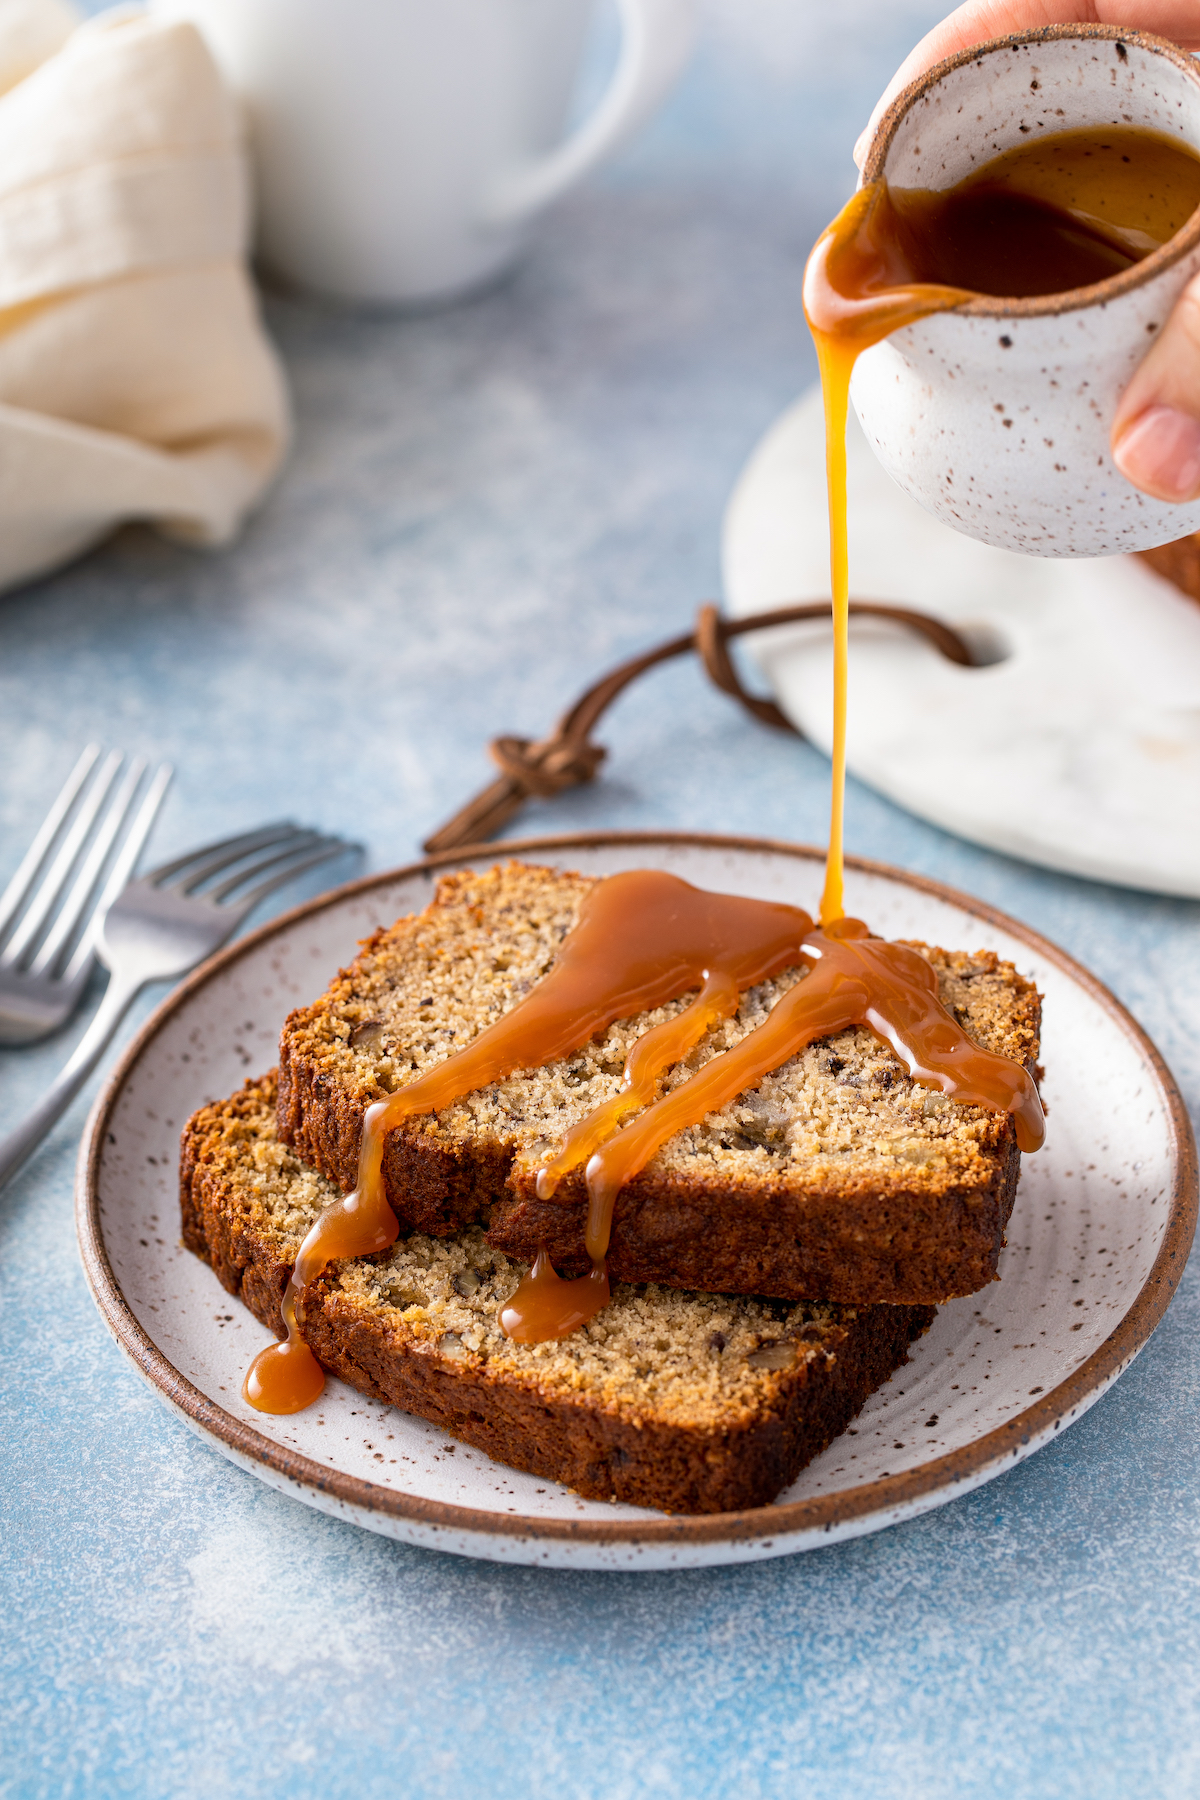 Slices of sweet quick bread on a small plate, with caramel sauce being drizzled over the top.